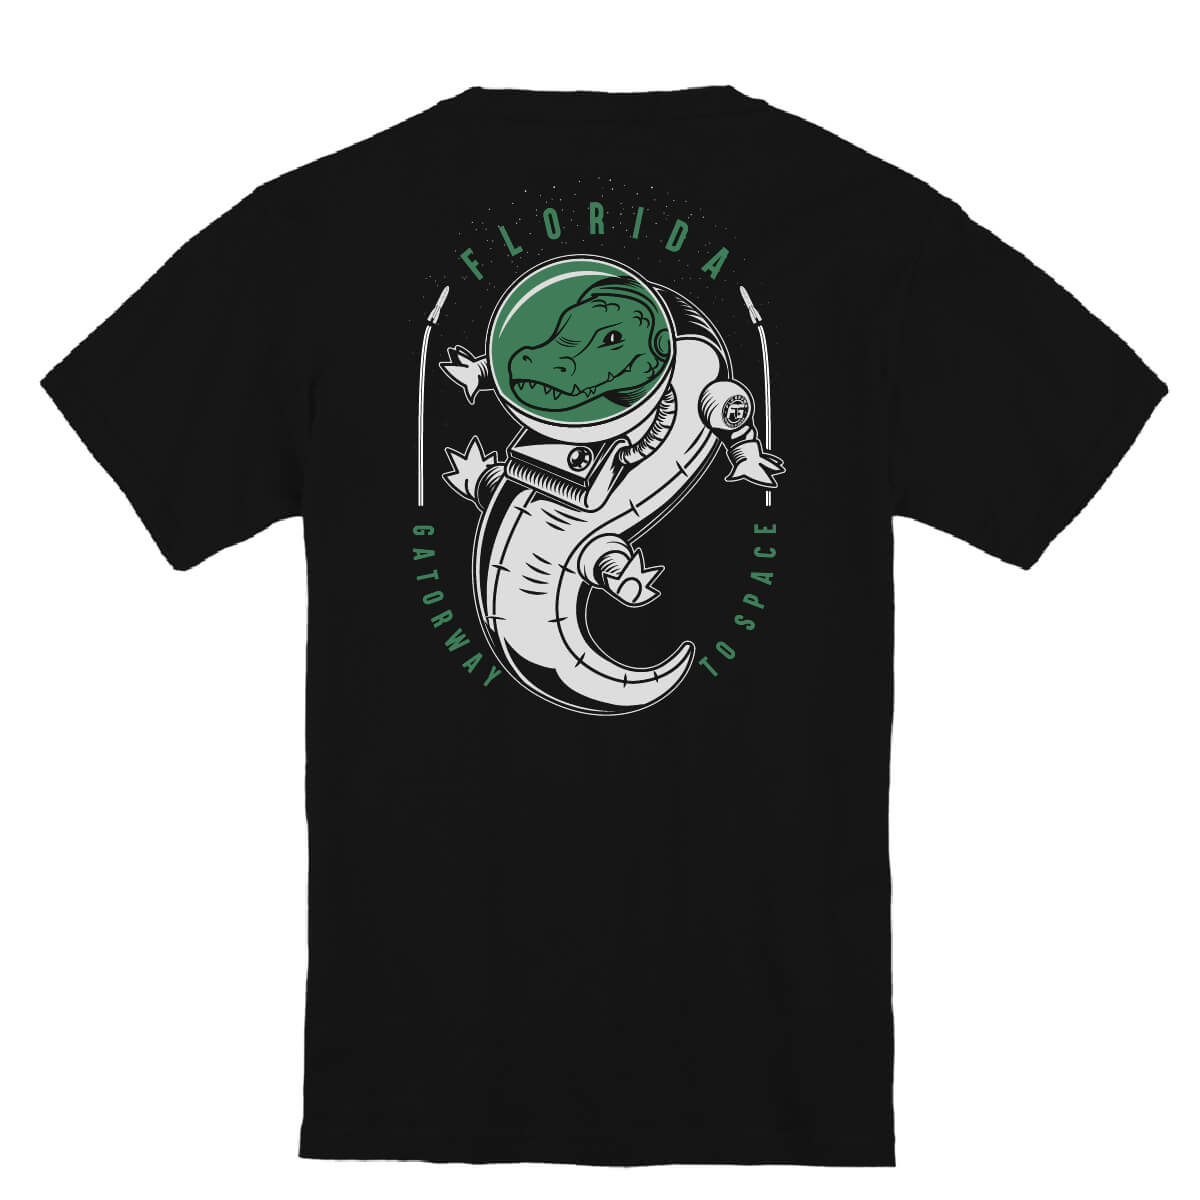 Gatorway to Space Youth Tee